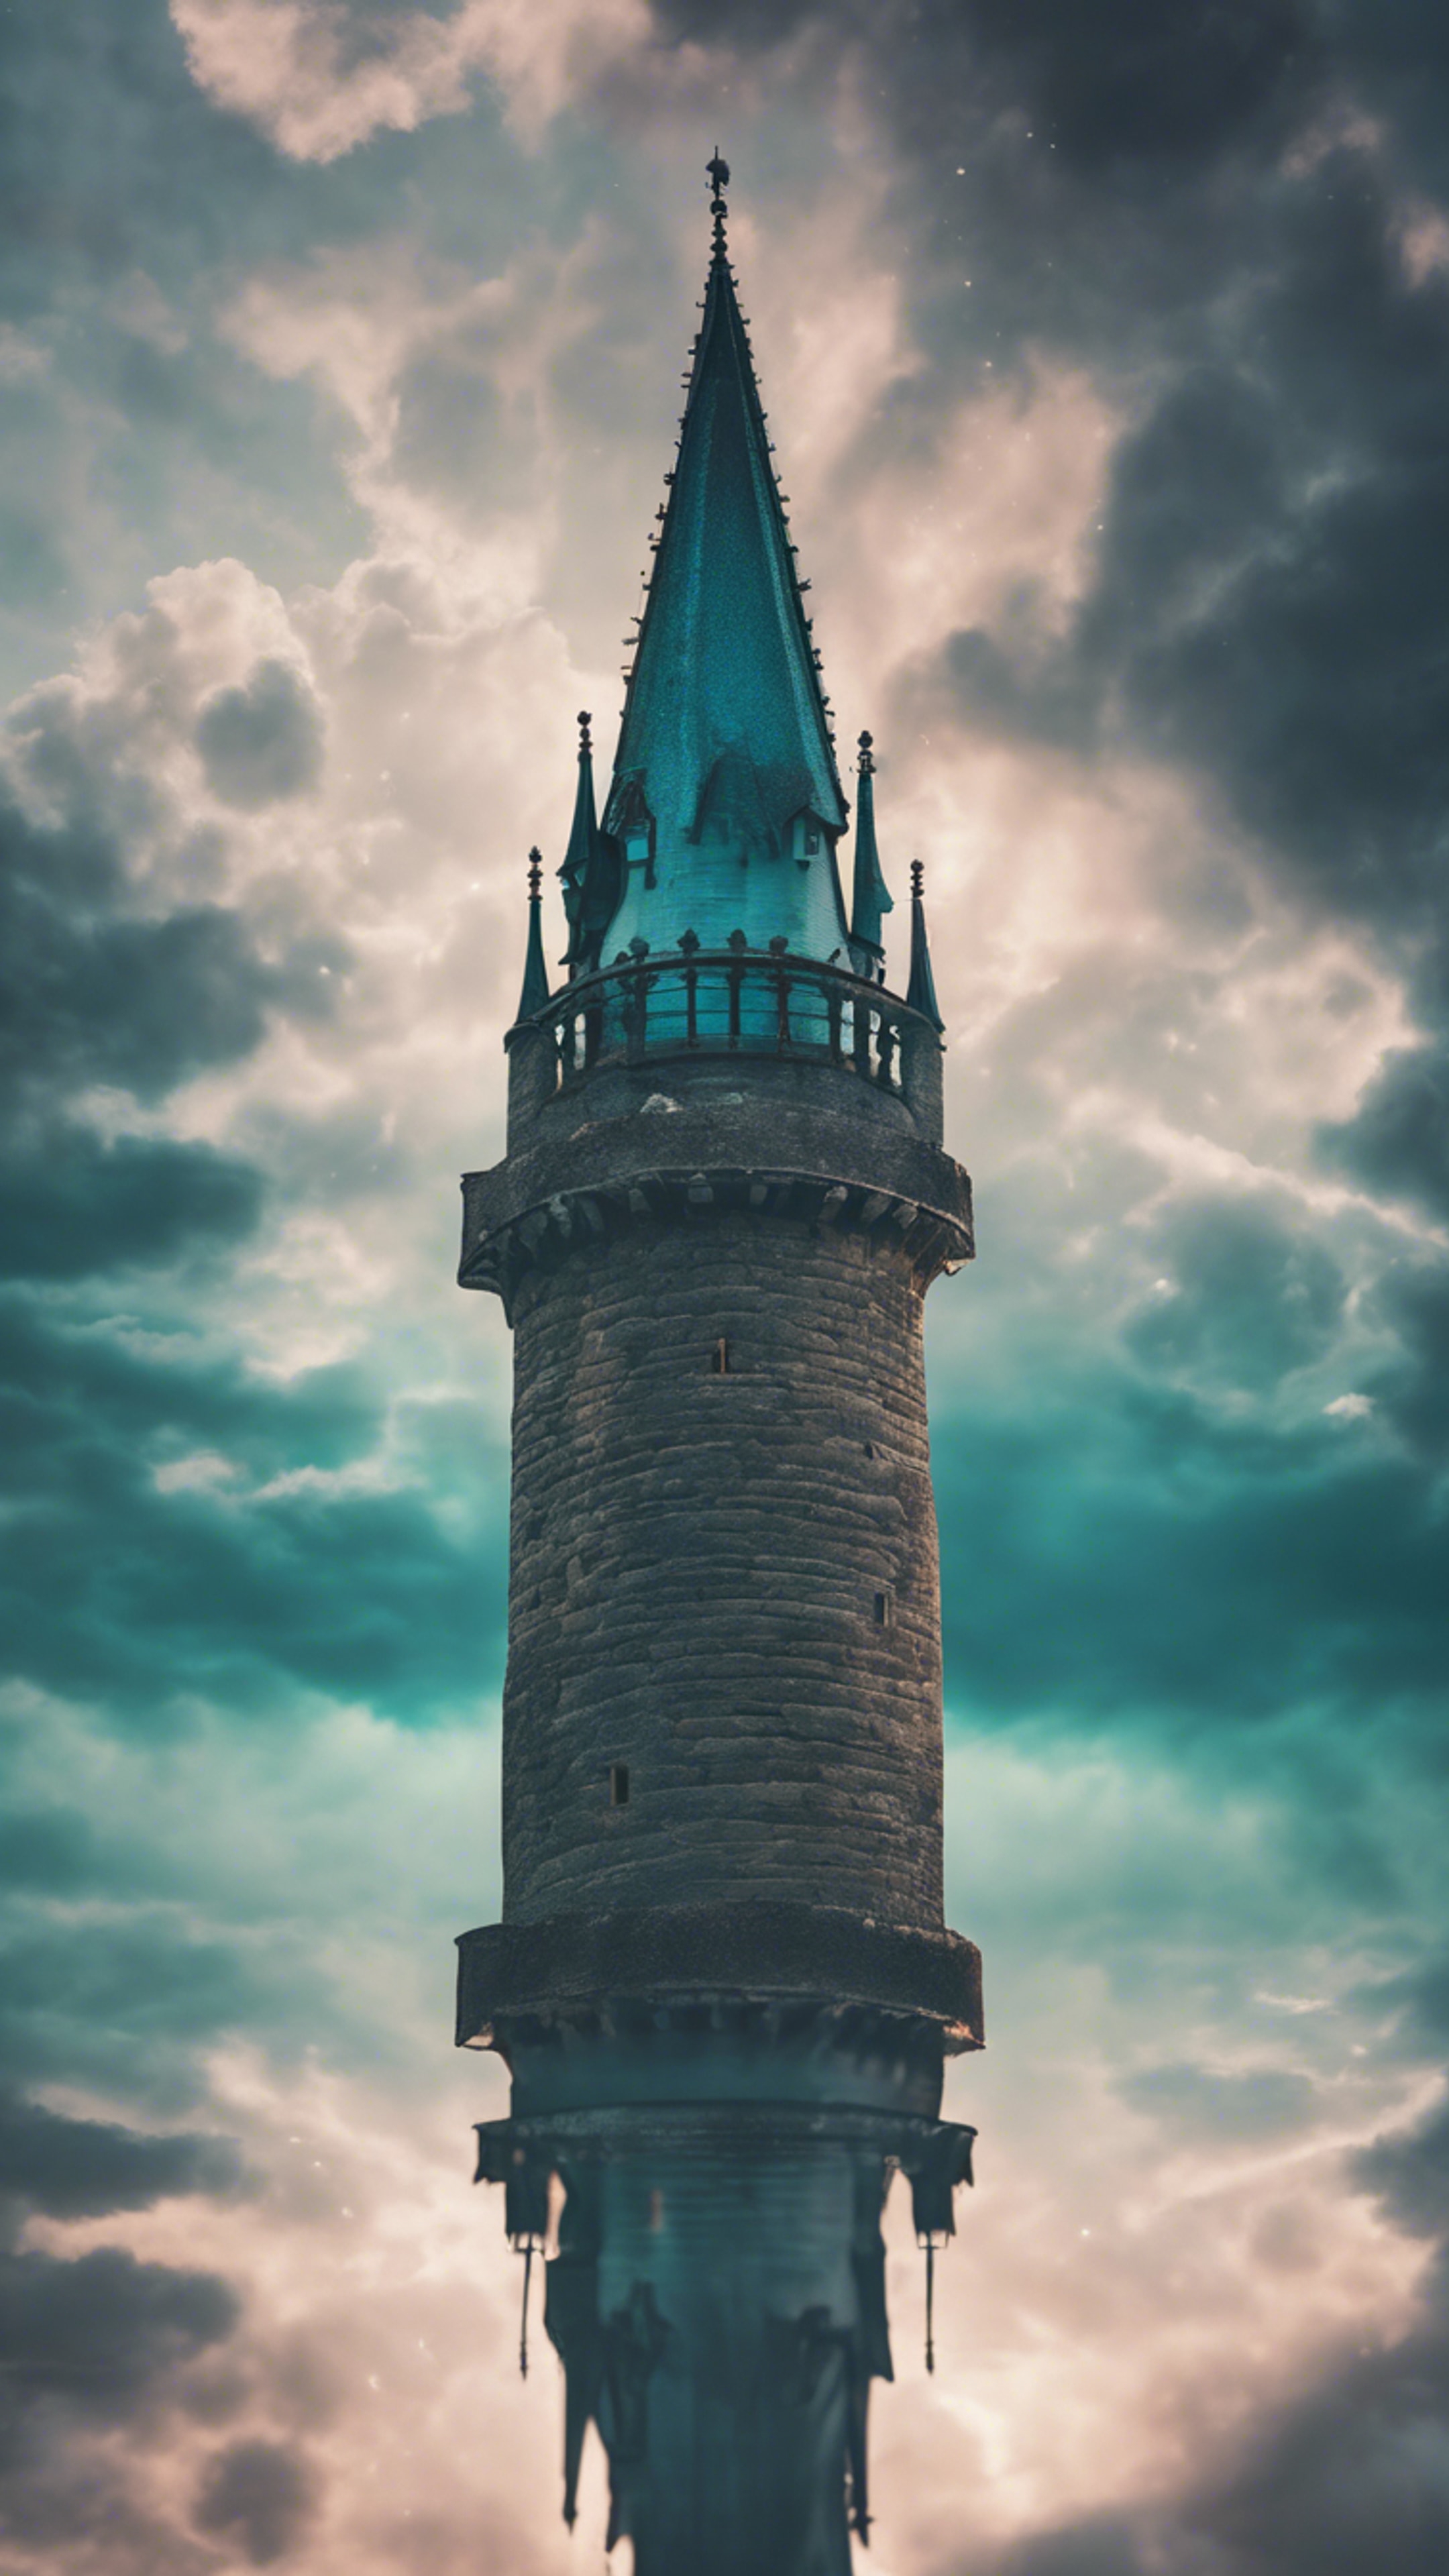 A Gothic castle tower reaching into the clouds, lit from within by mystery teal lights. Валлпапер[95b6d3de171842619bd4]